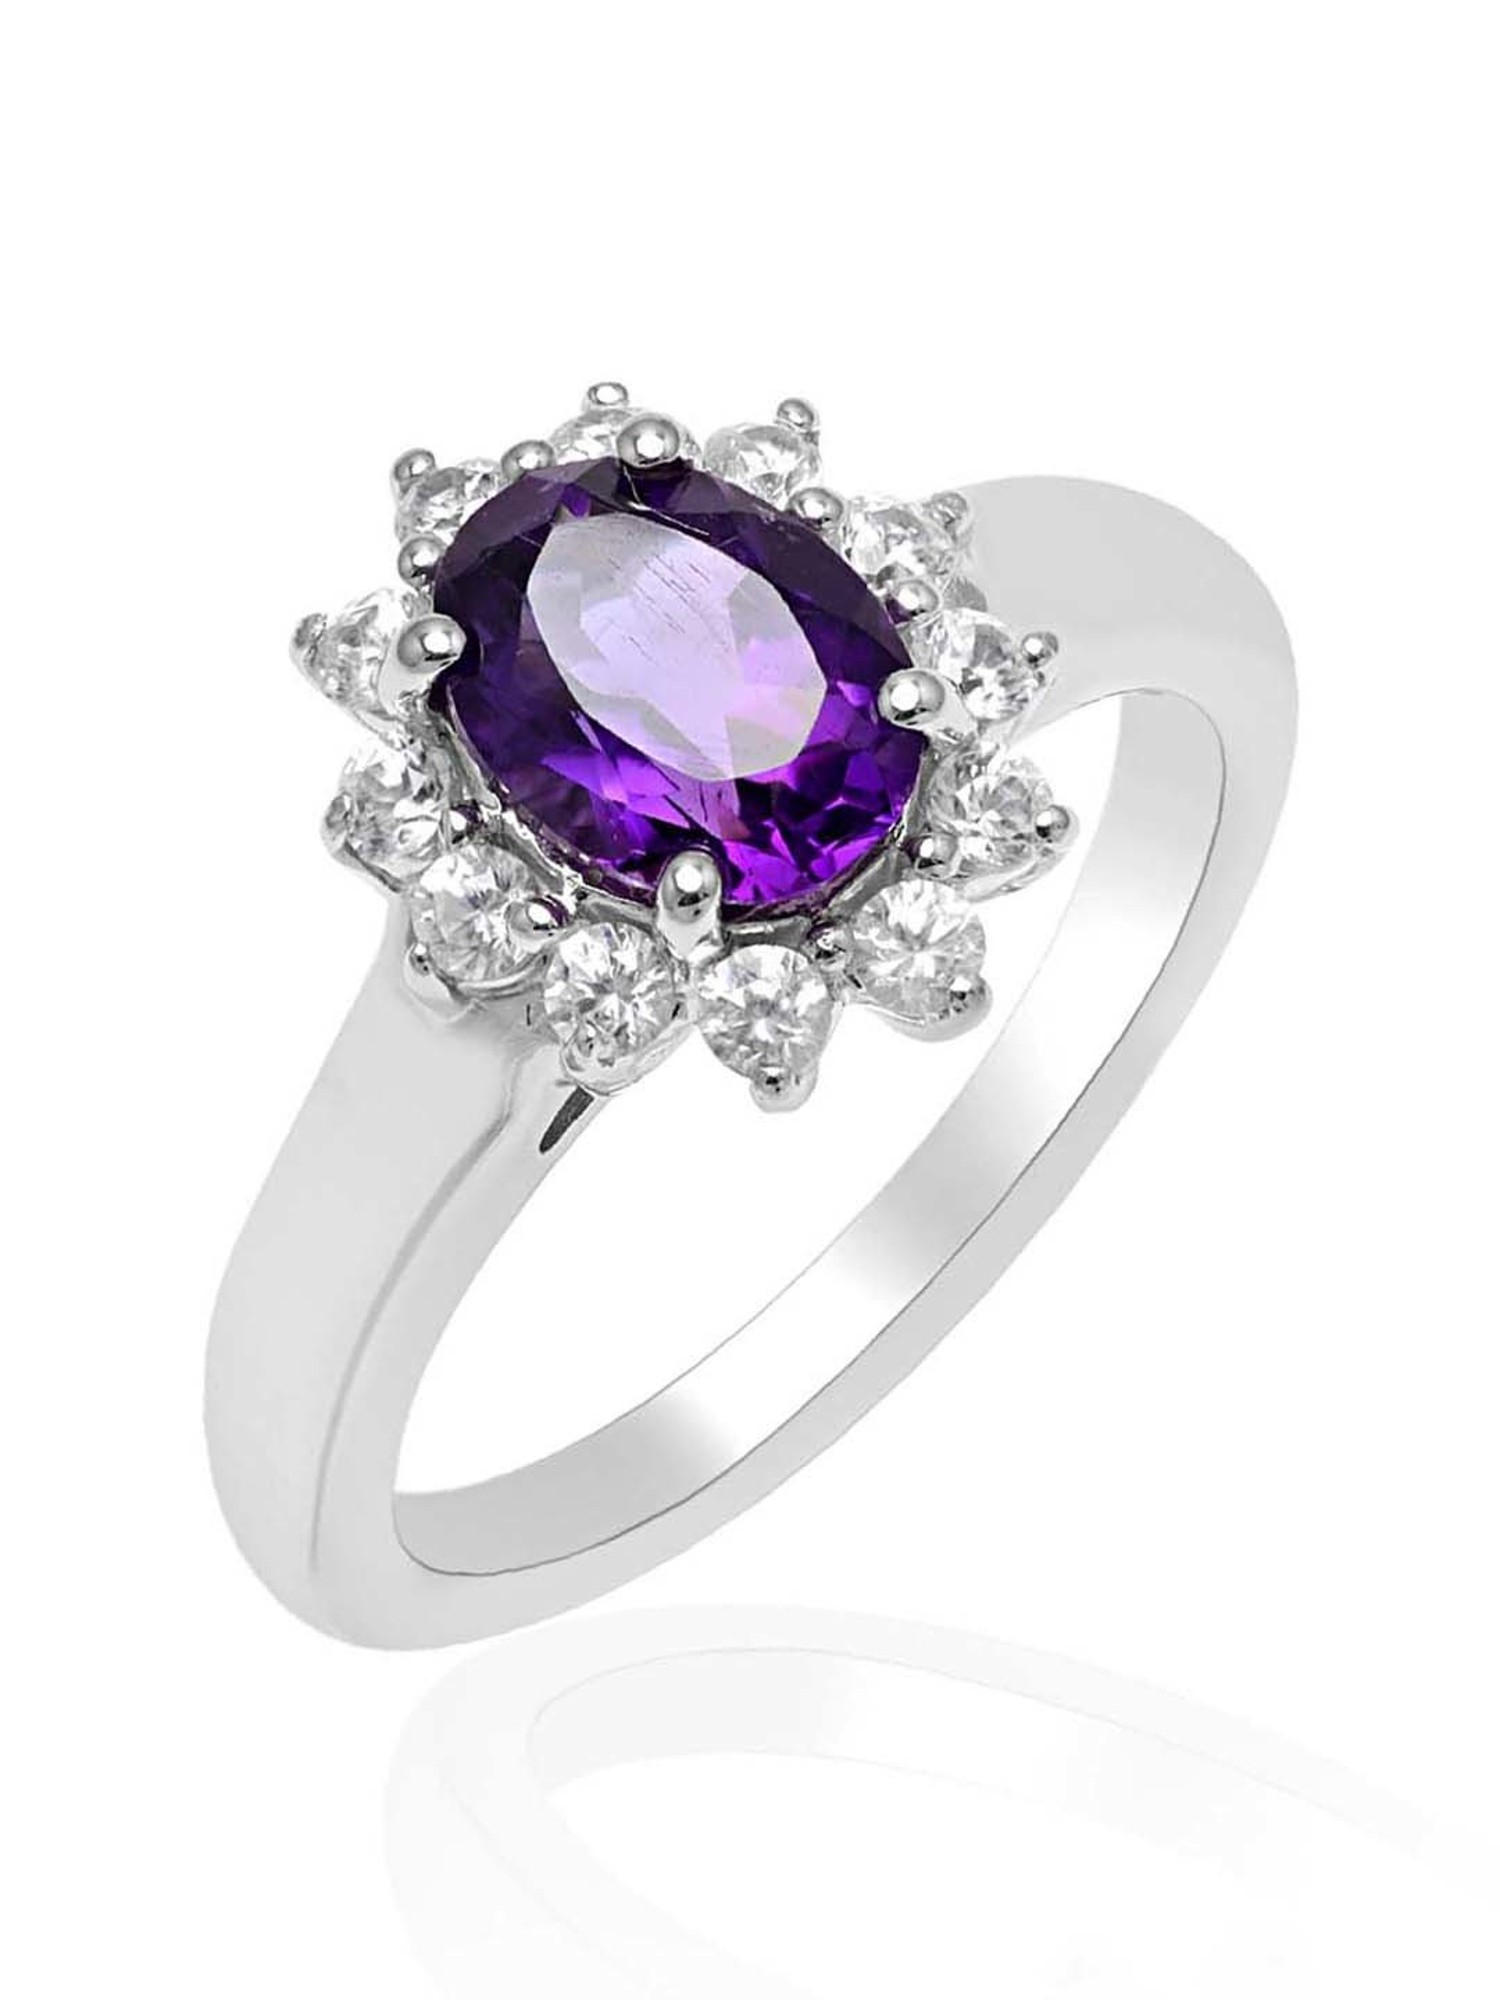 Black Gothic Rings for Women, Goth Created Amethyst Unique Black Gold  Wedding Engagement Ring Jewelry Gifts - Walmart.com